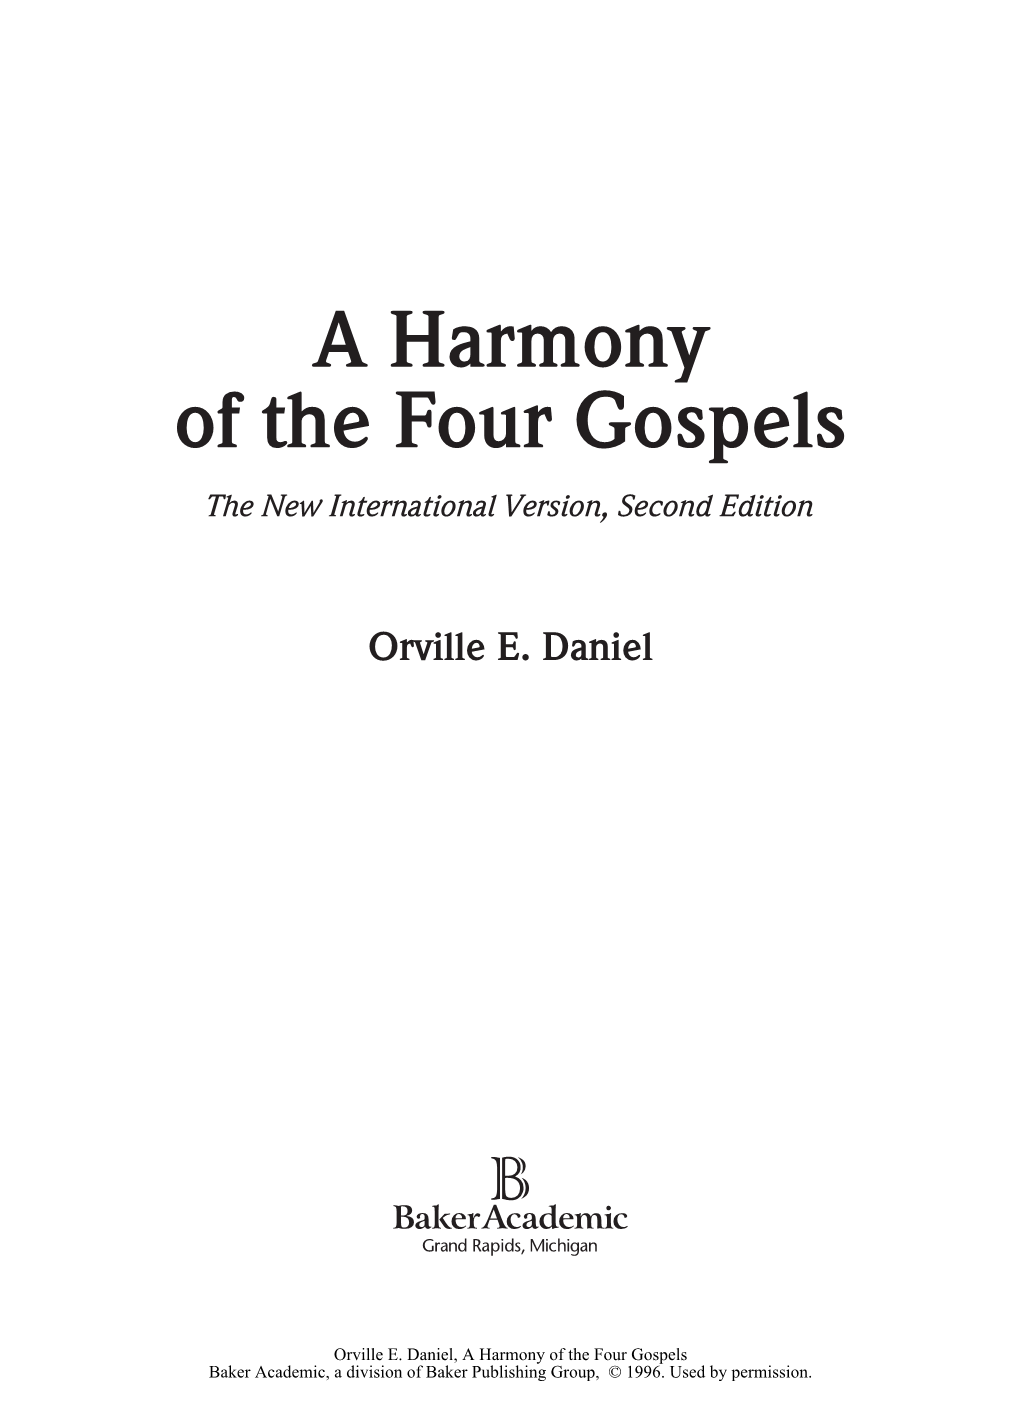 A Harmony of the Four Gospels the New International Version, Second Edition